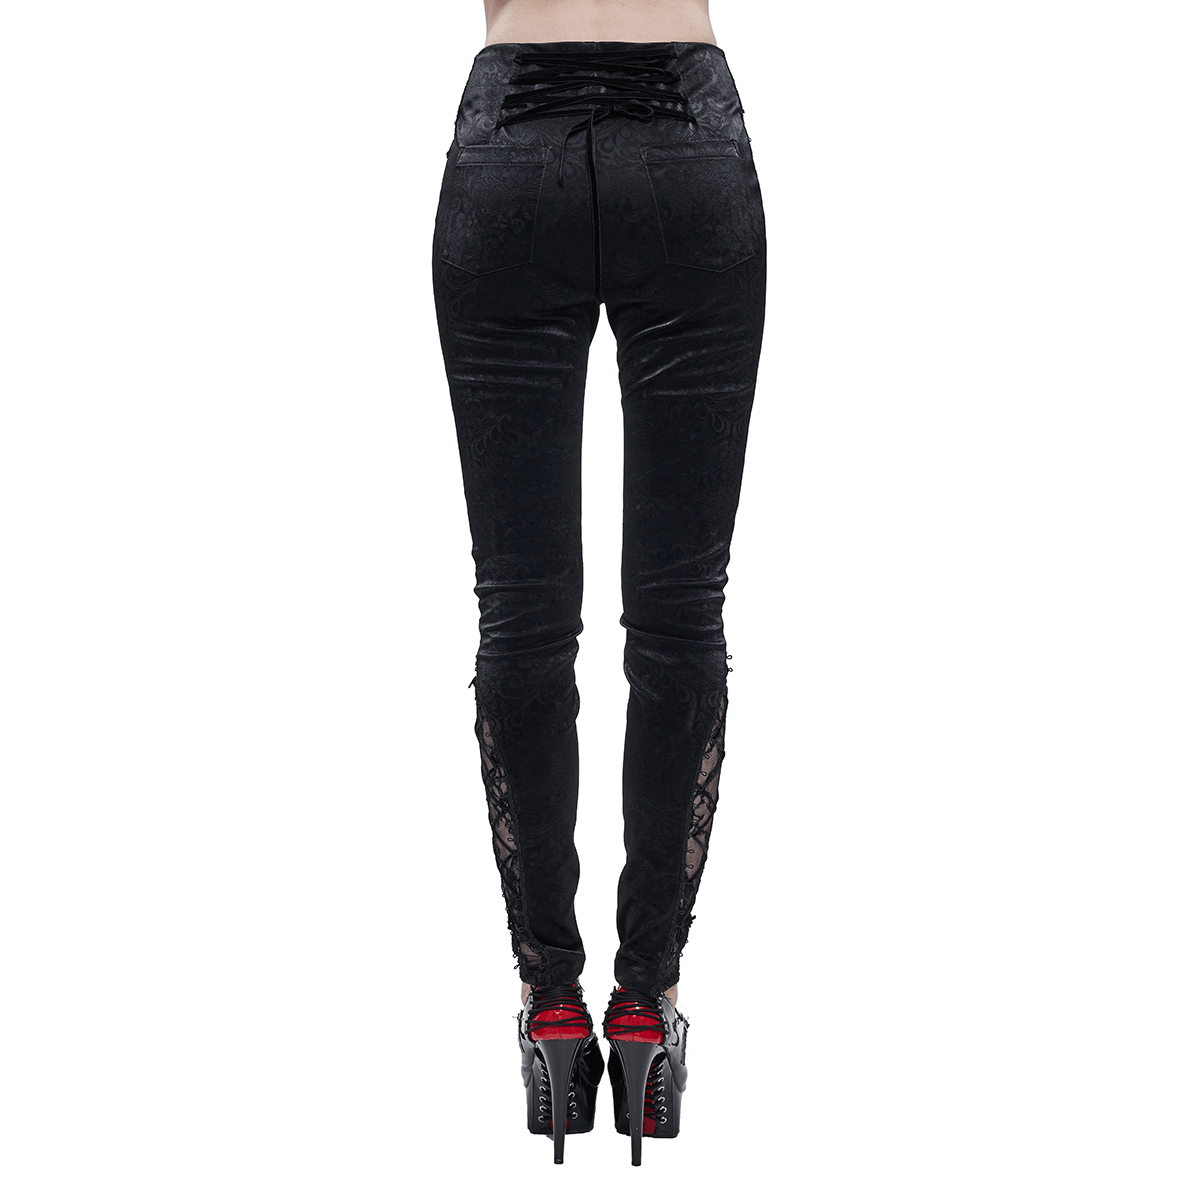 Gothic Women's PU Leather Metal Zipper Pants / High Waisted Trousers With Red Lace & String - HARD'N'HEAVY